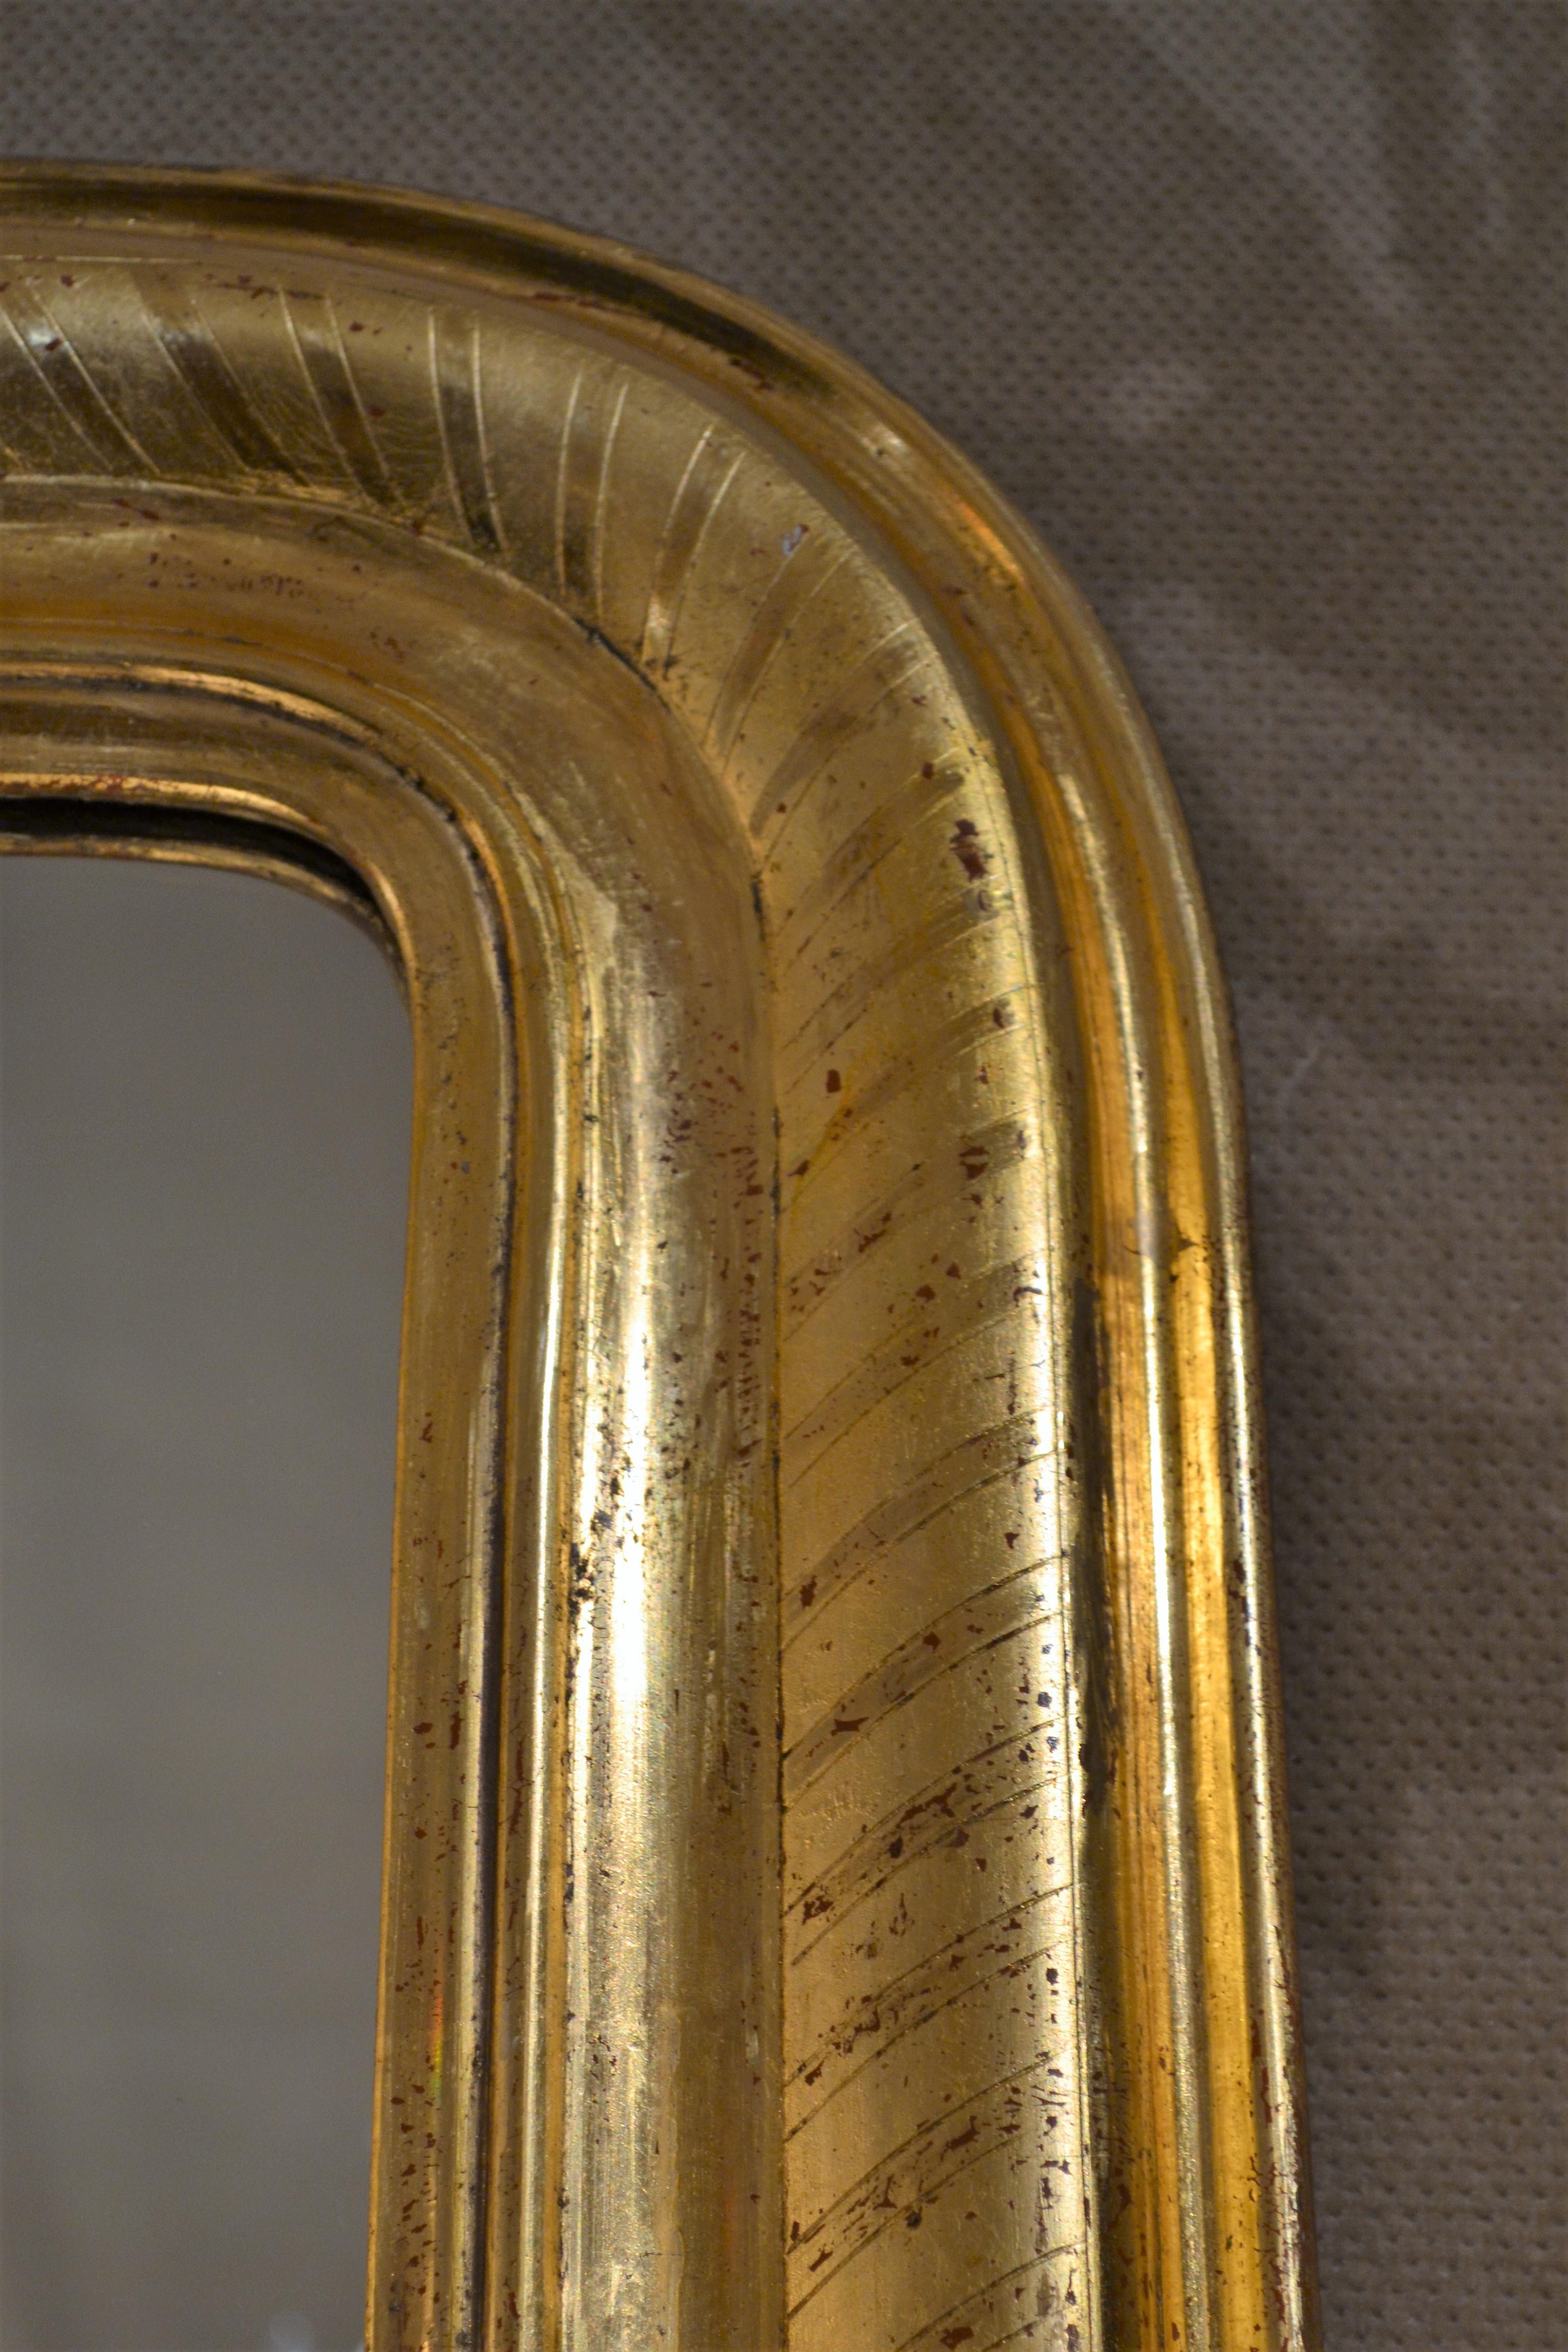 This is a lovely mirror. There are minor losses in the gold leaf which can easily be repaired.